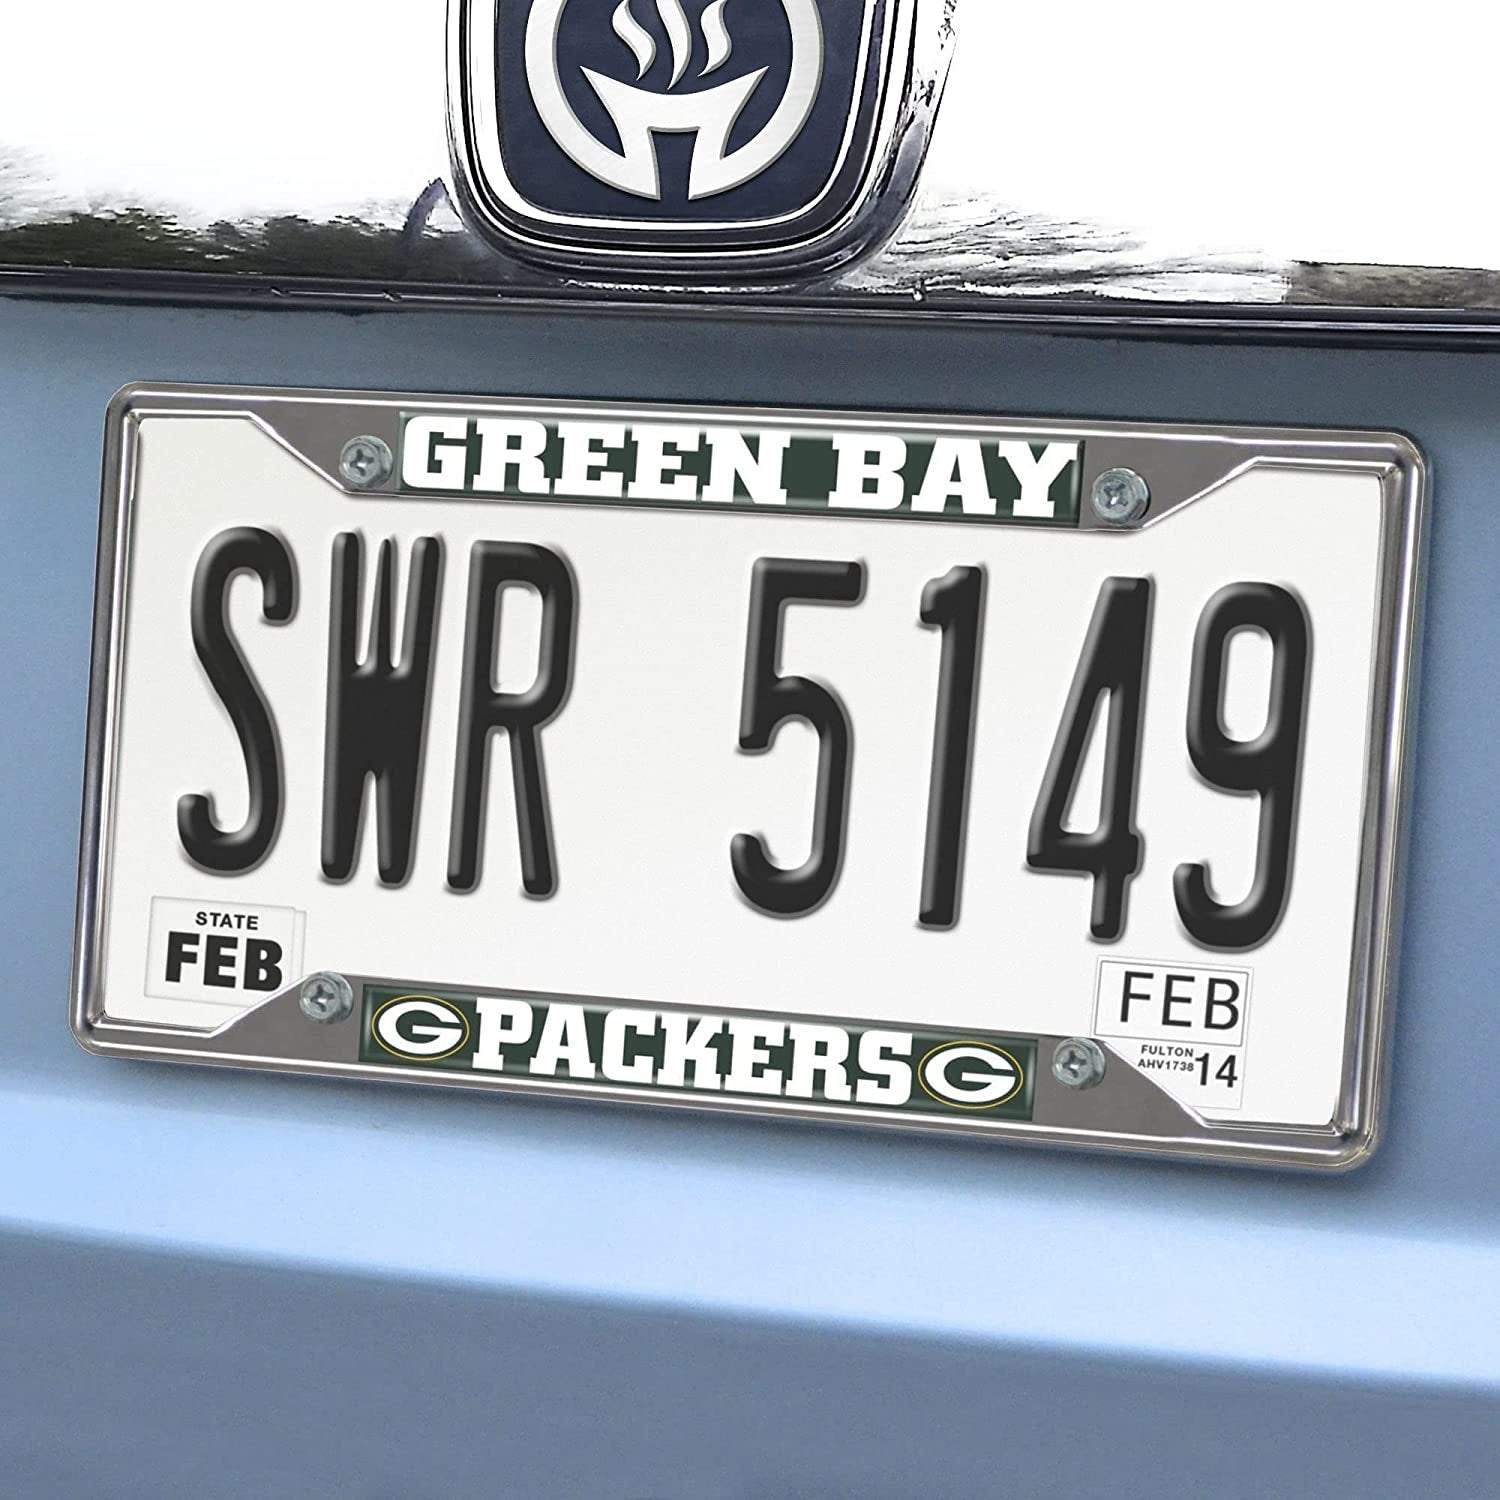 Green Bay Packers Chrome Metal License Plate Frame Tag Cover, 6x12 Inch